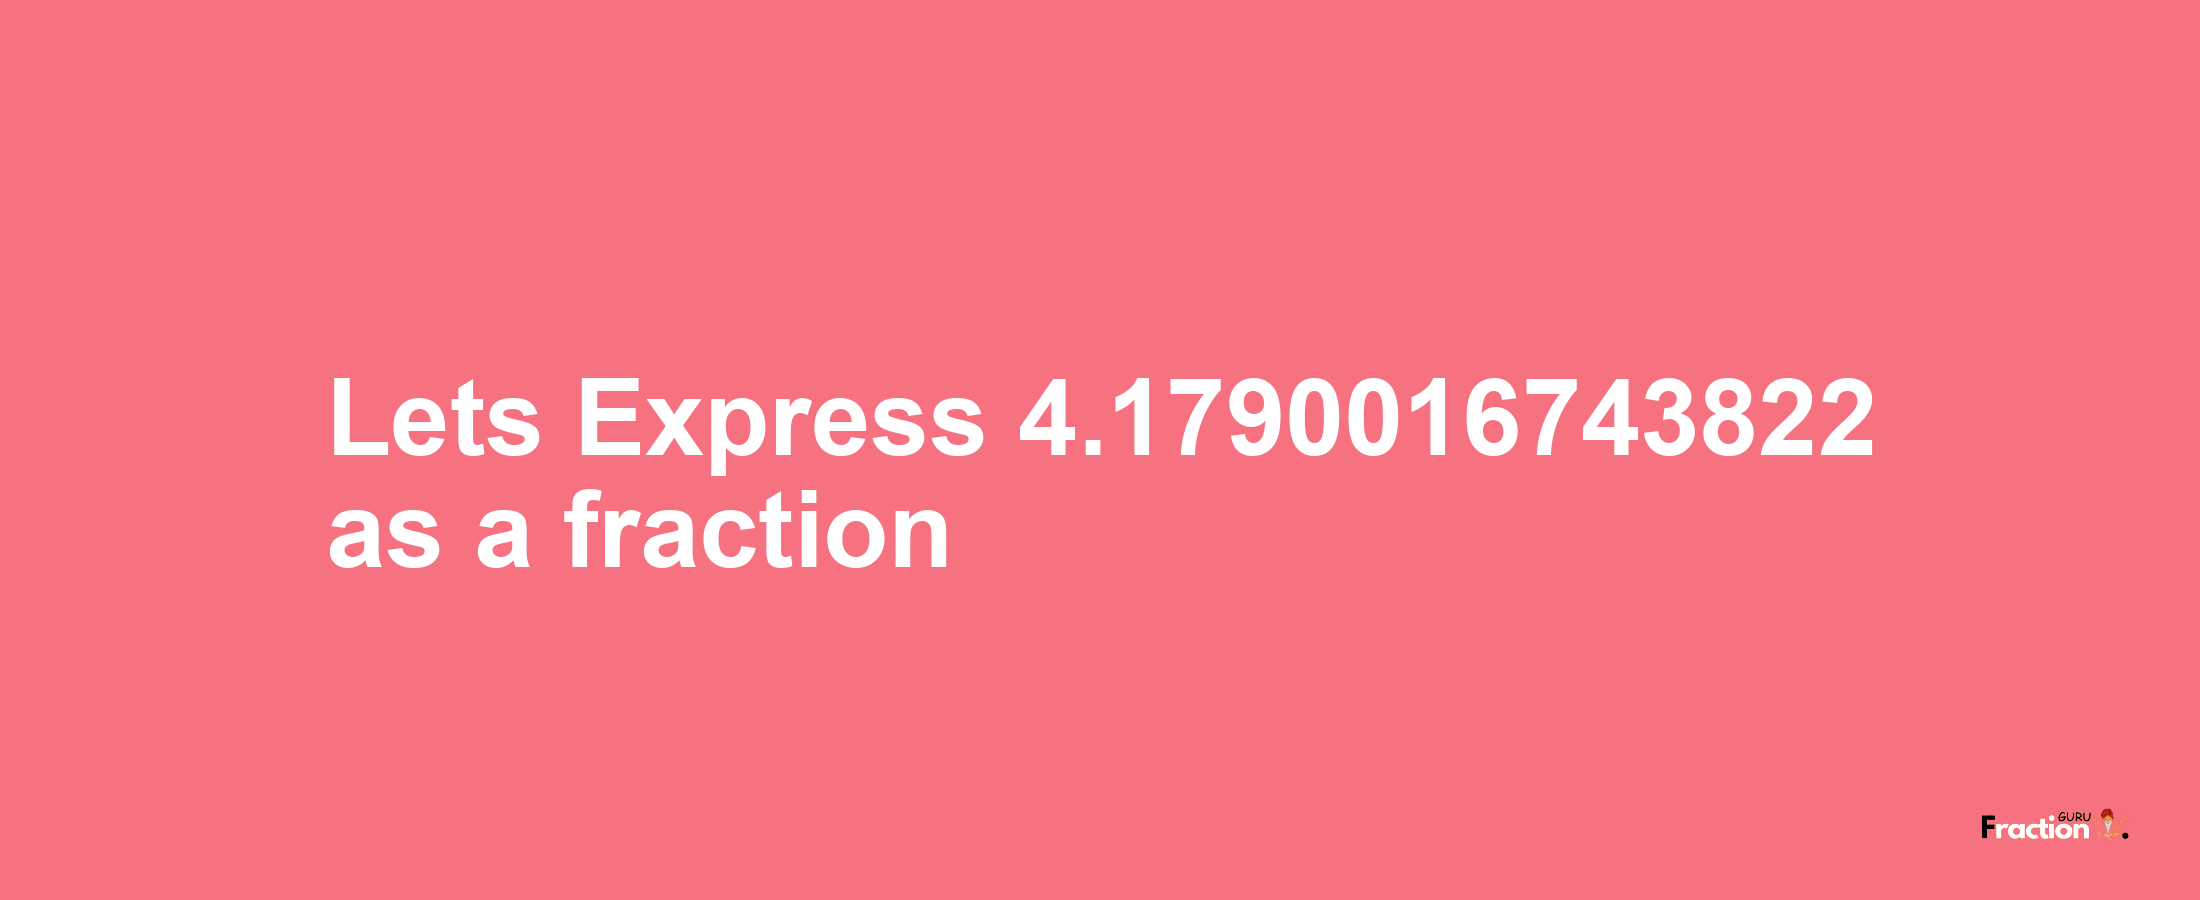 Lets Express 4.1790016743822 as afraction